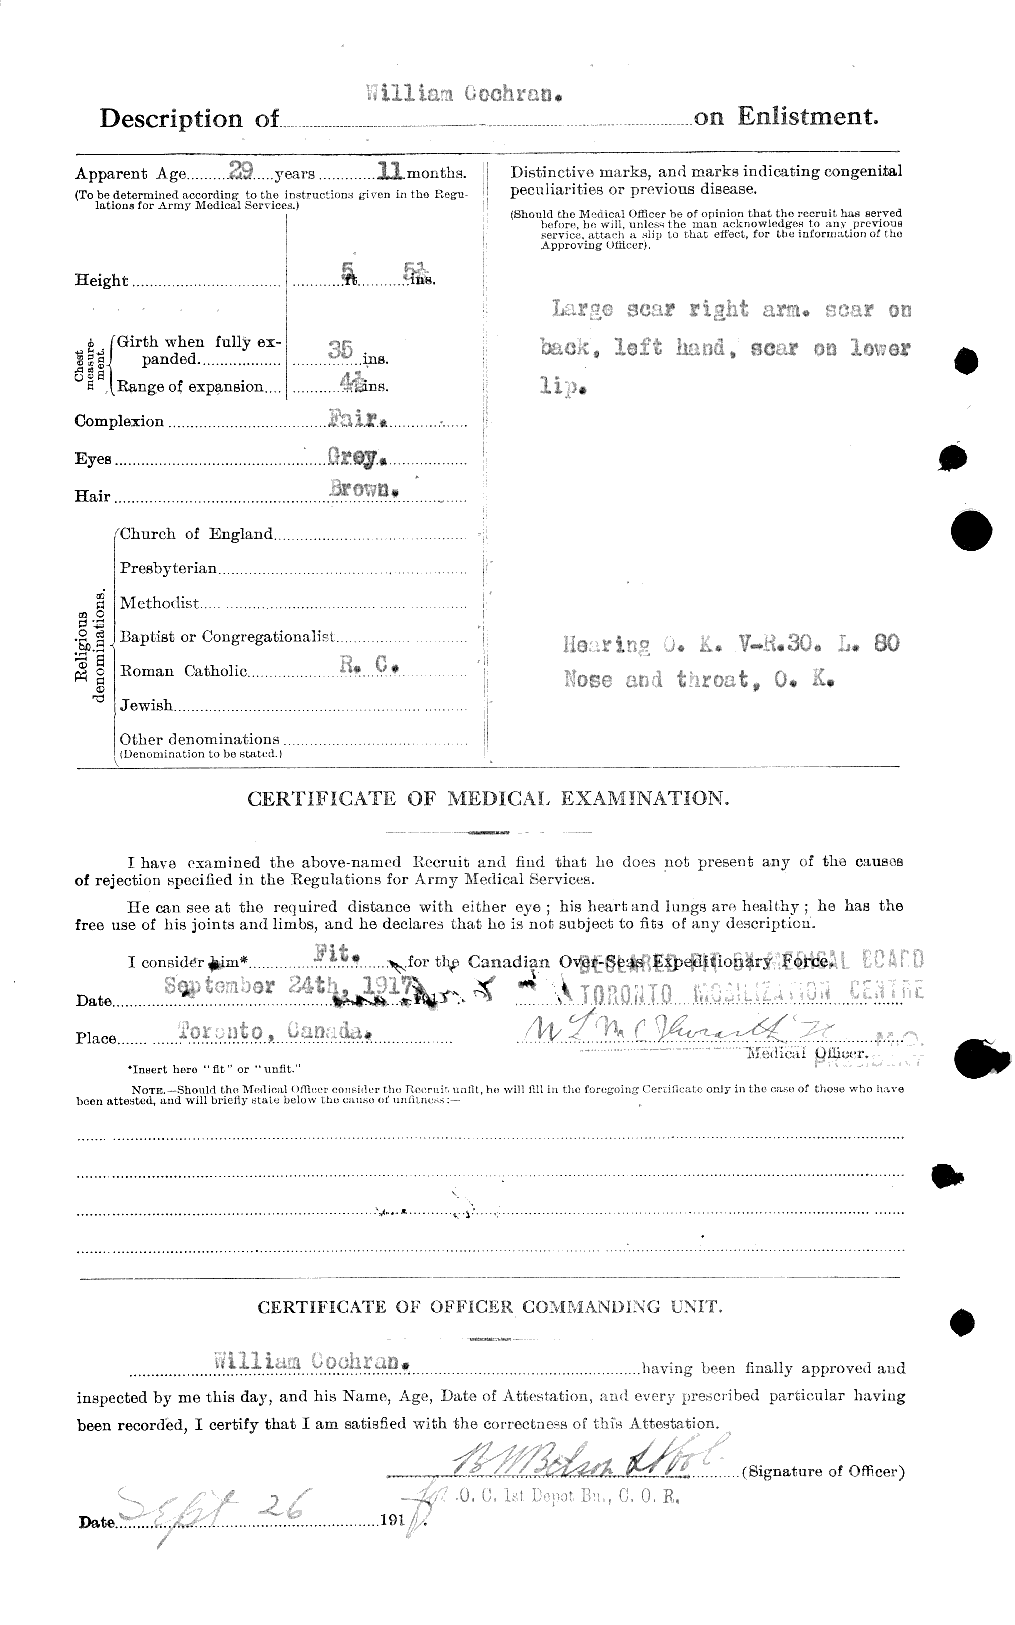 Personnel Records of the First World War - CEF 026498b